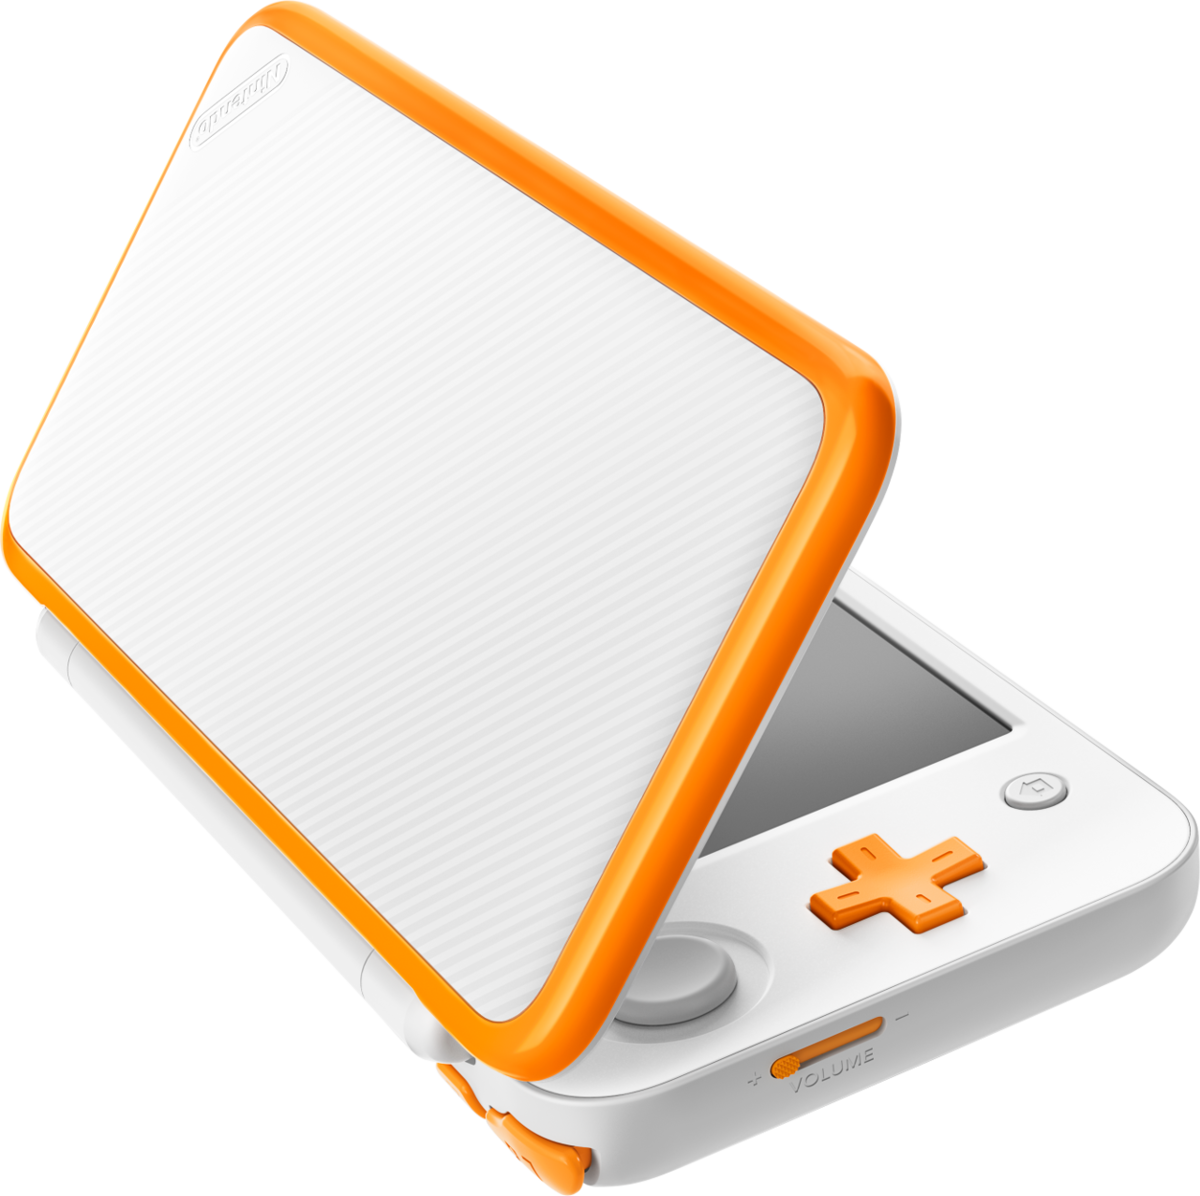 White Orange New Nintendo 2ds Xl To Be Released In - New Nintendo 2ds Xl - White/orange (1200x1196)